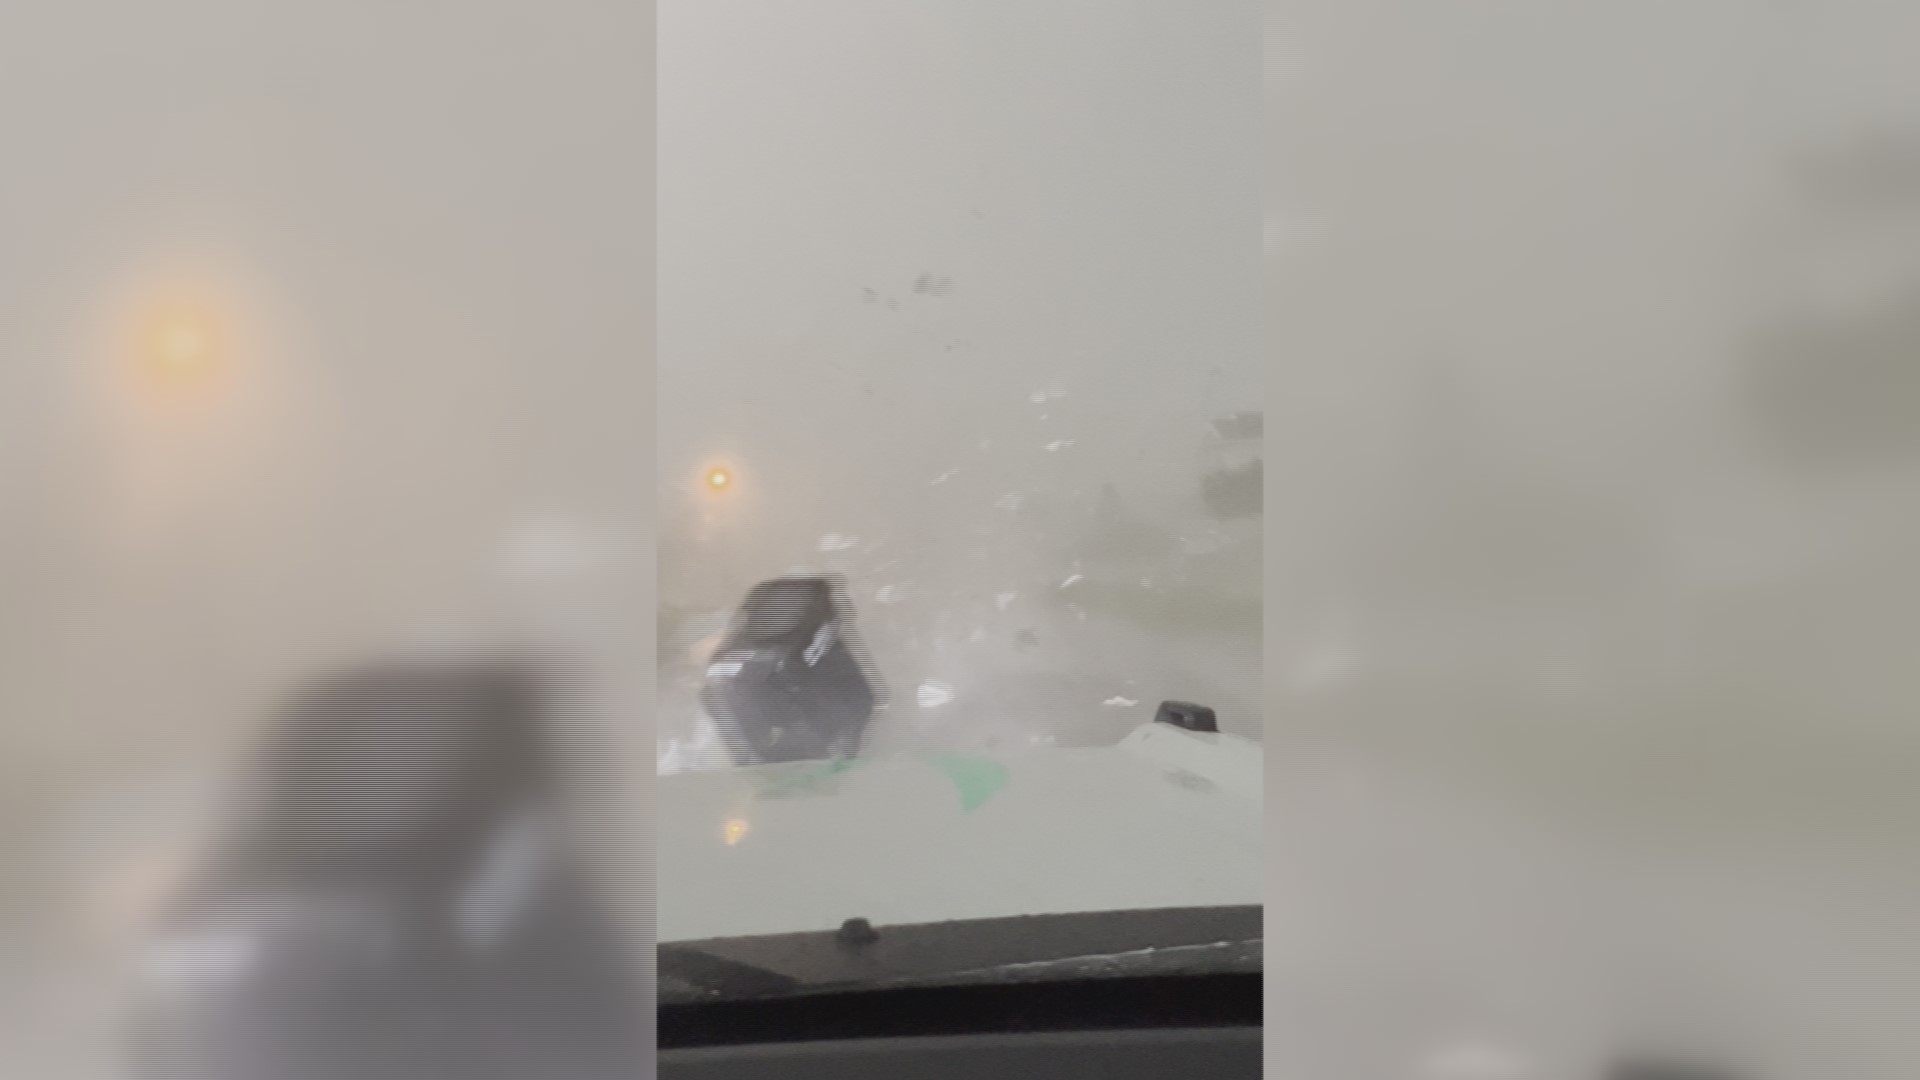 Viewer video shows high winds blowing debris across the road during the storms Thursday evening.